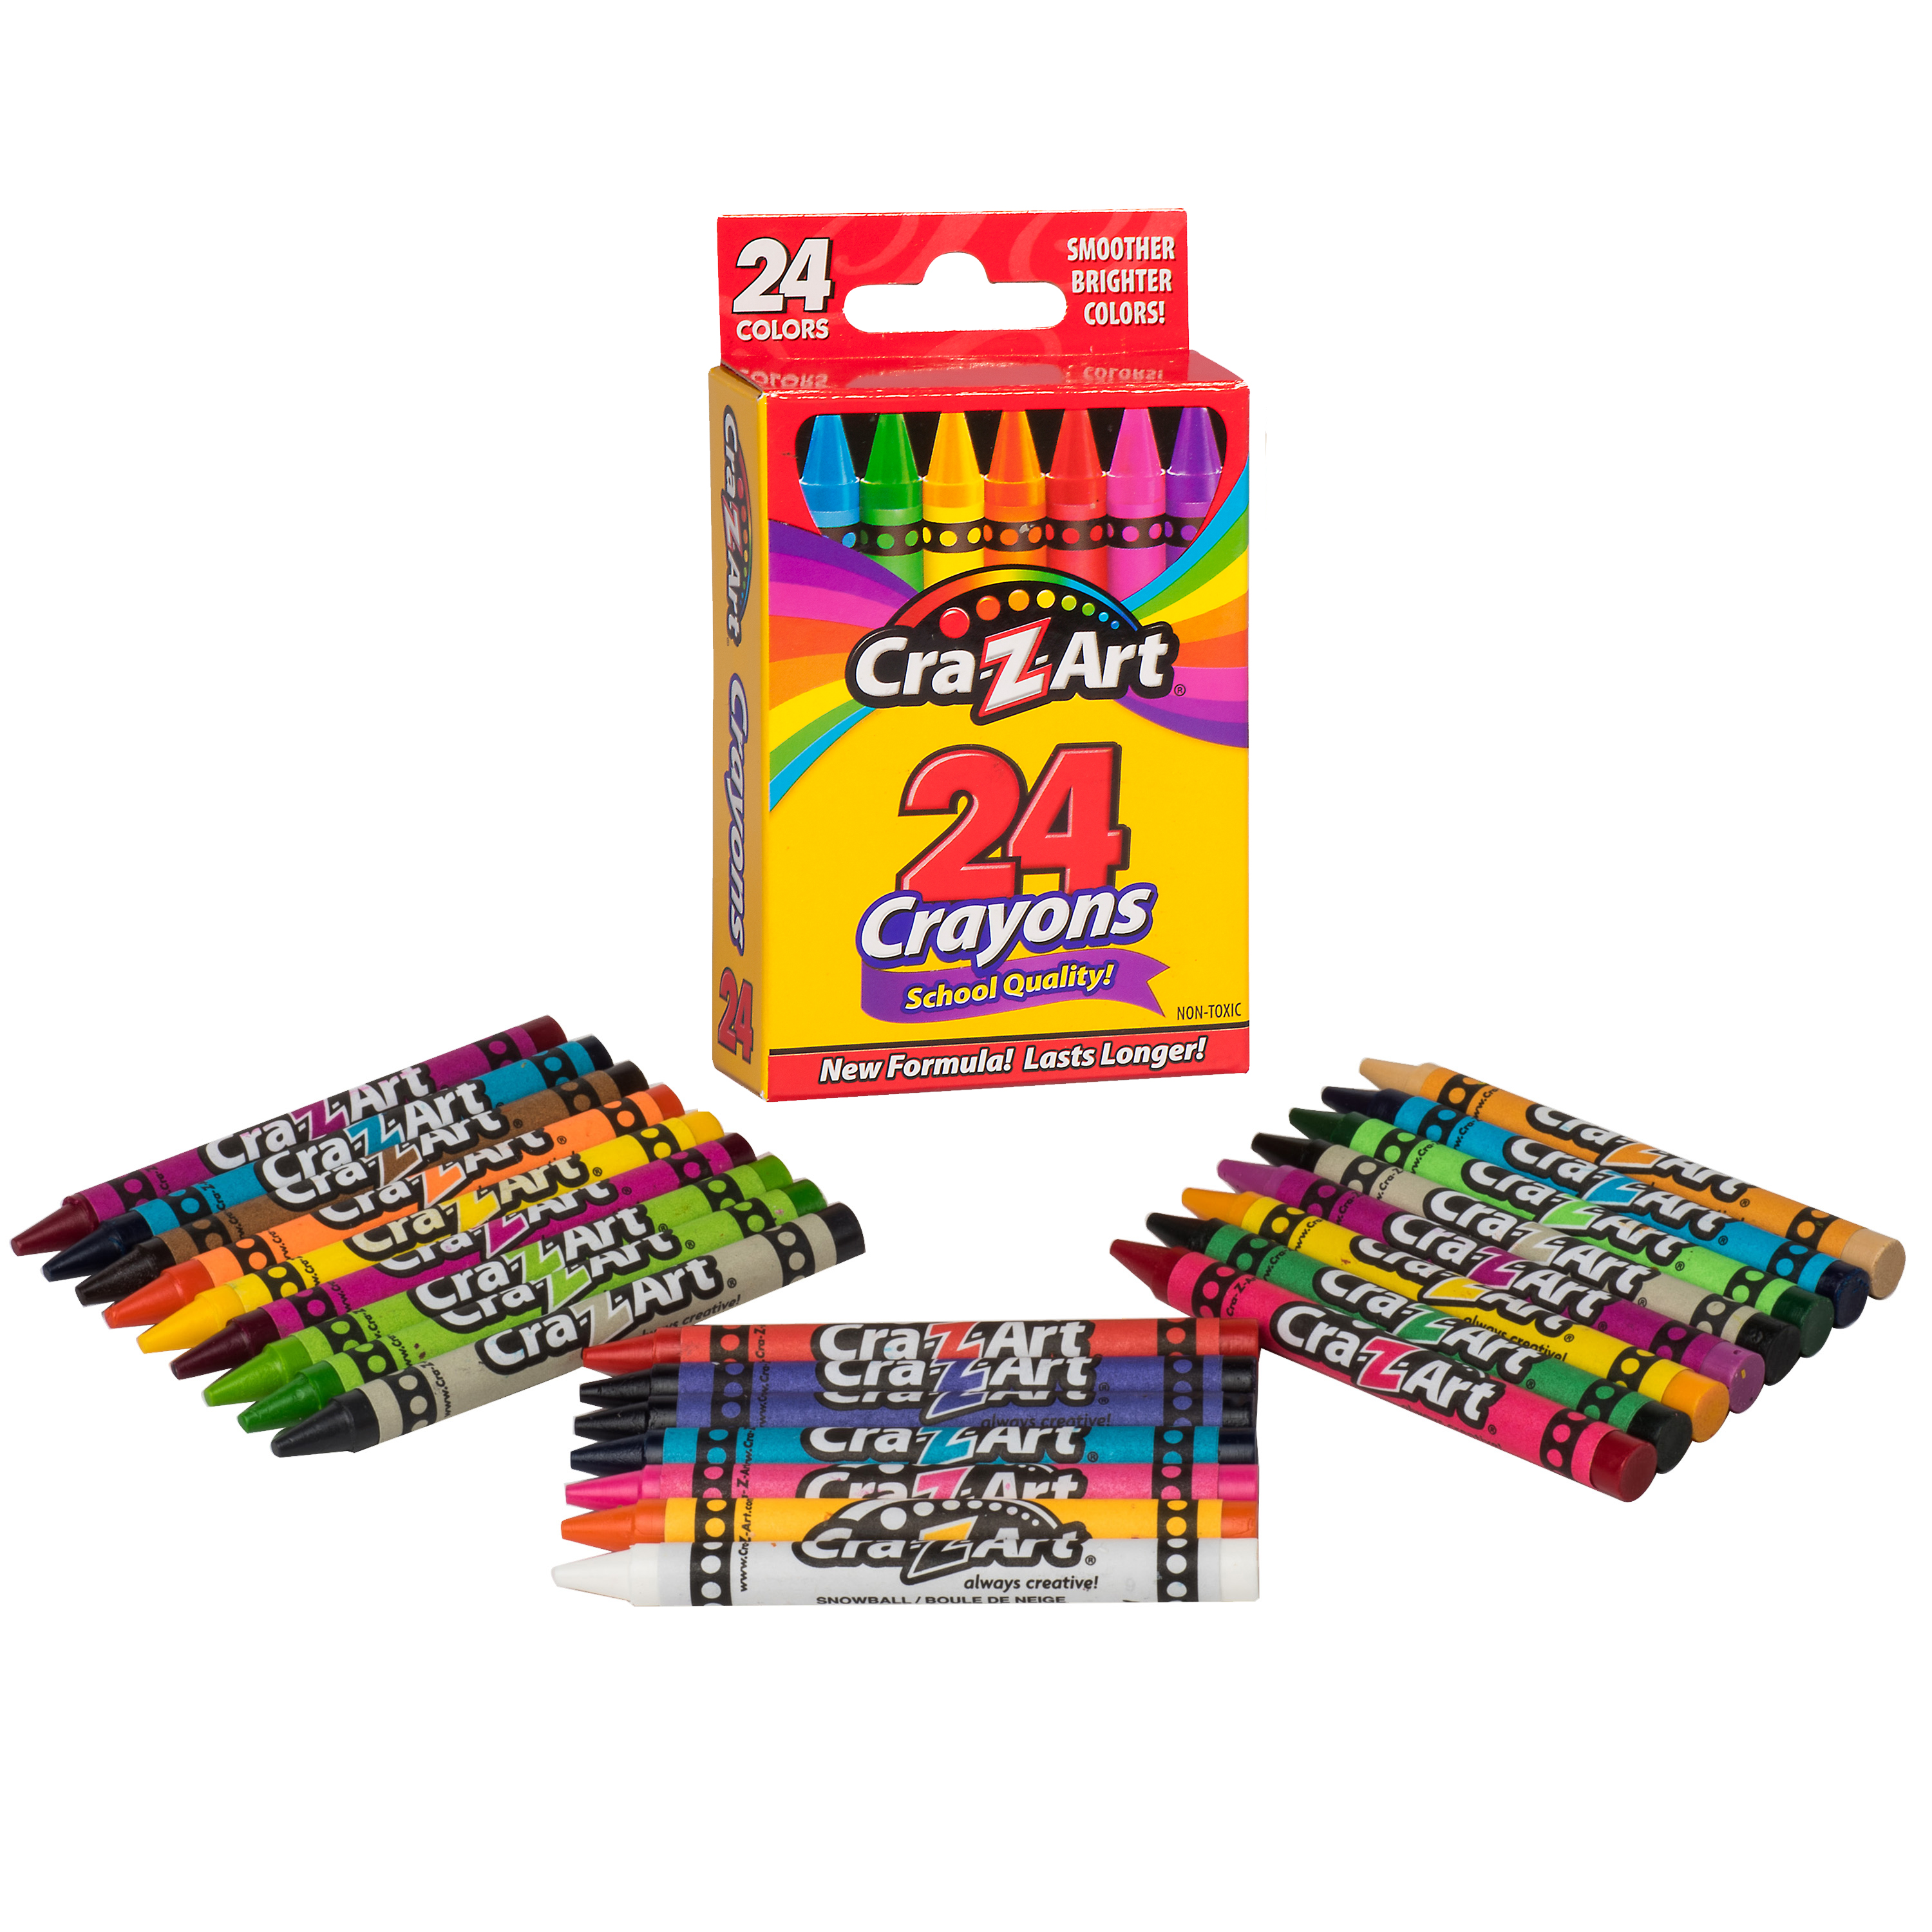 Cra-Z-Art School Quality Multicolor Crayons, 24 Count, Back to School Supplies - image 7 of 11